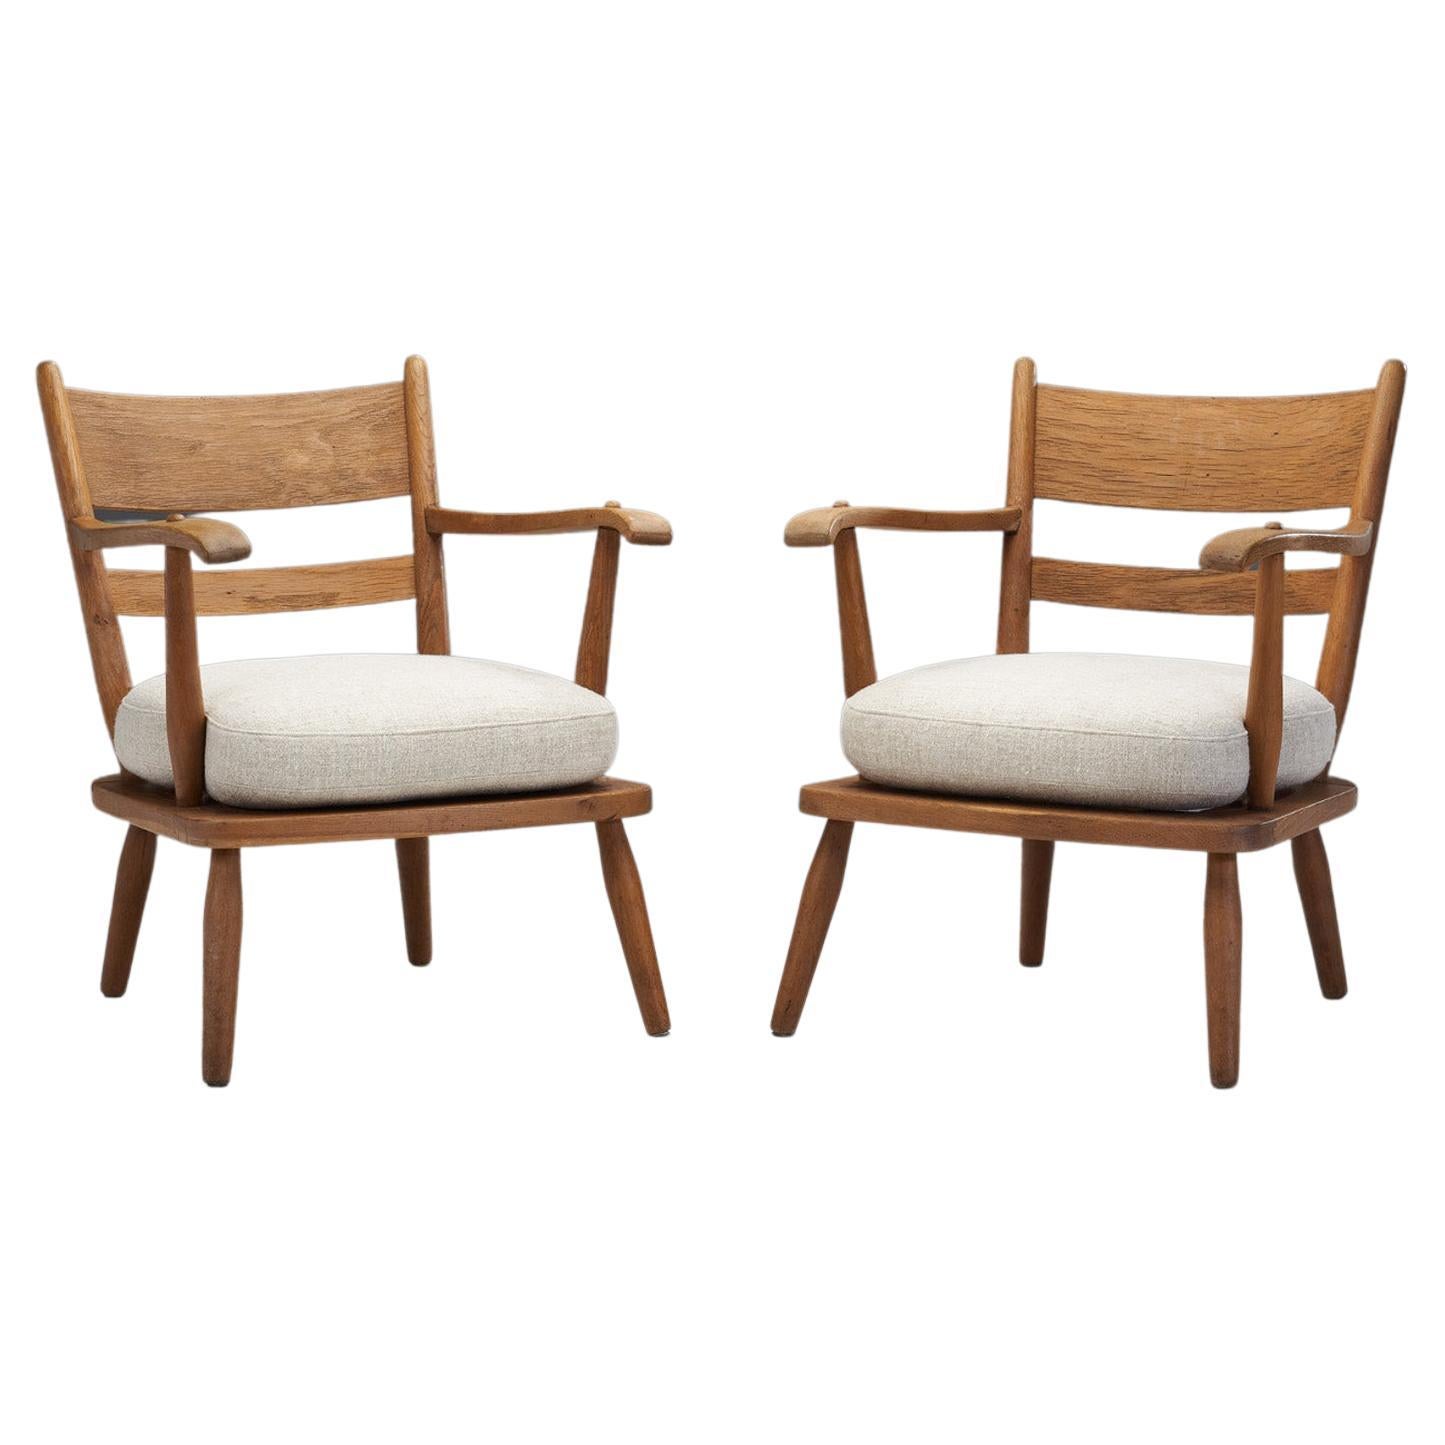 Danish Cabinetmaker Oak Armchairs with Upholstered Cushions, Denmark 1940s